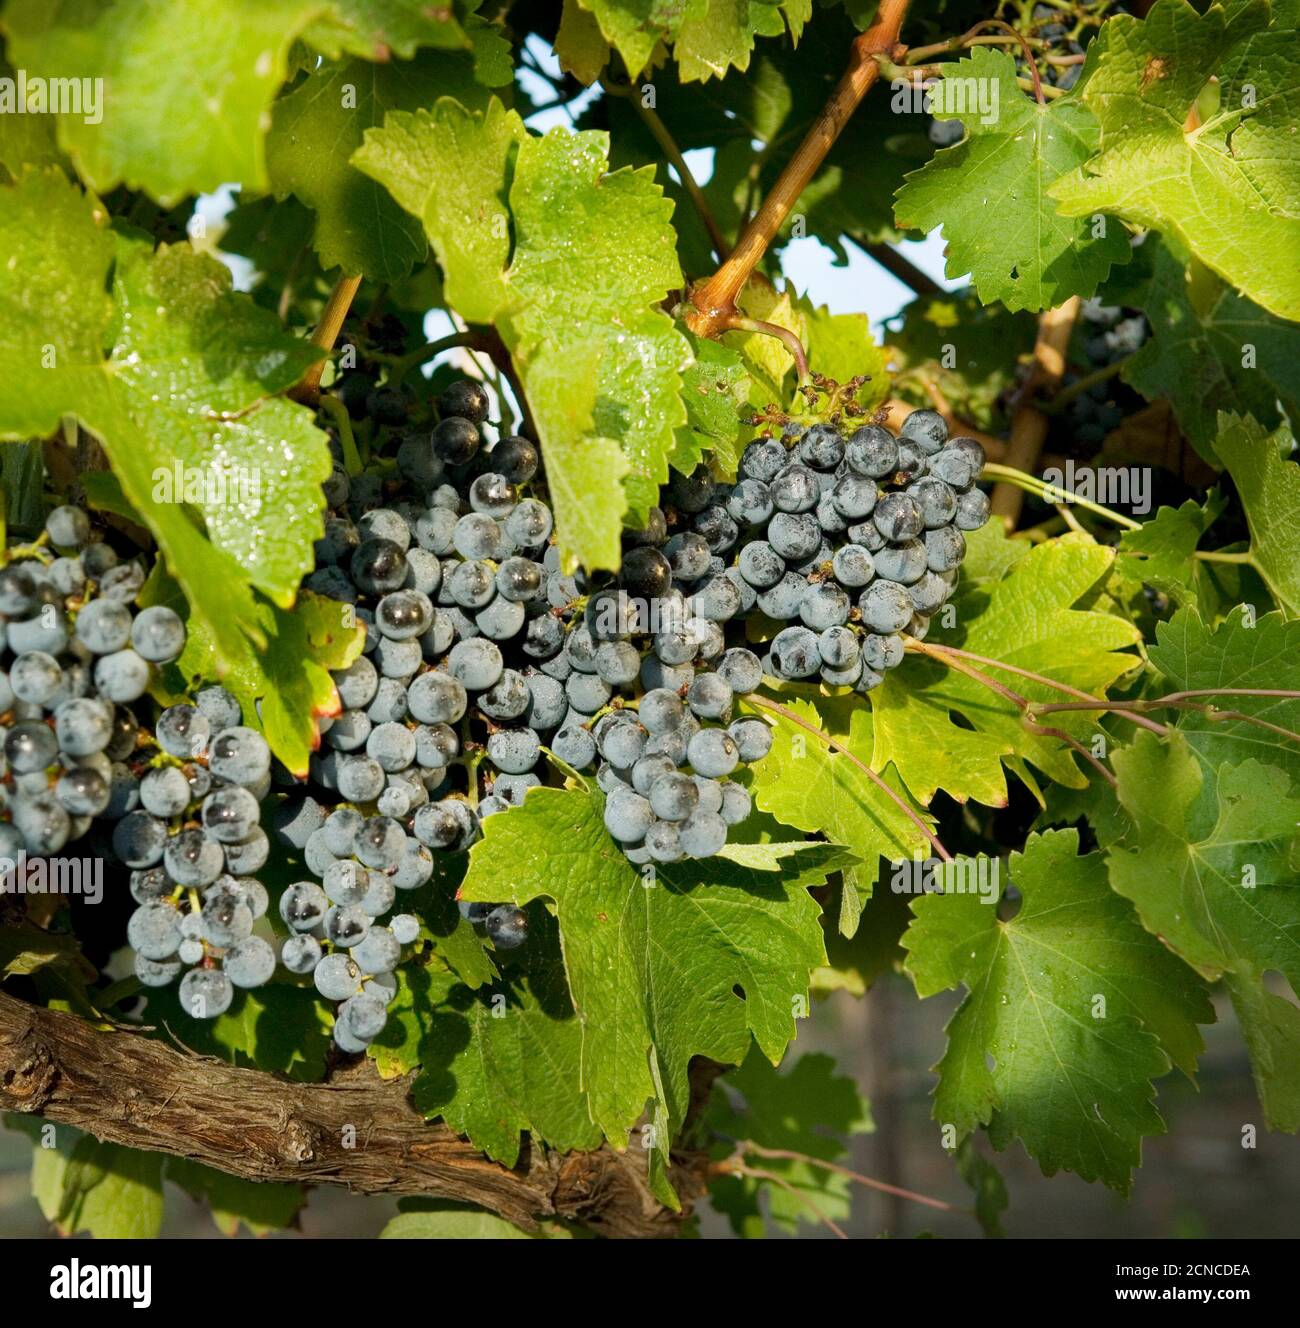 Bunches of grapes on the vine Stock Photo